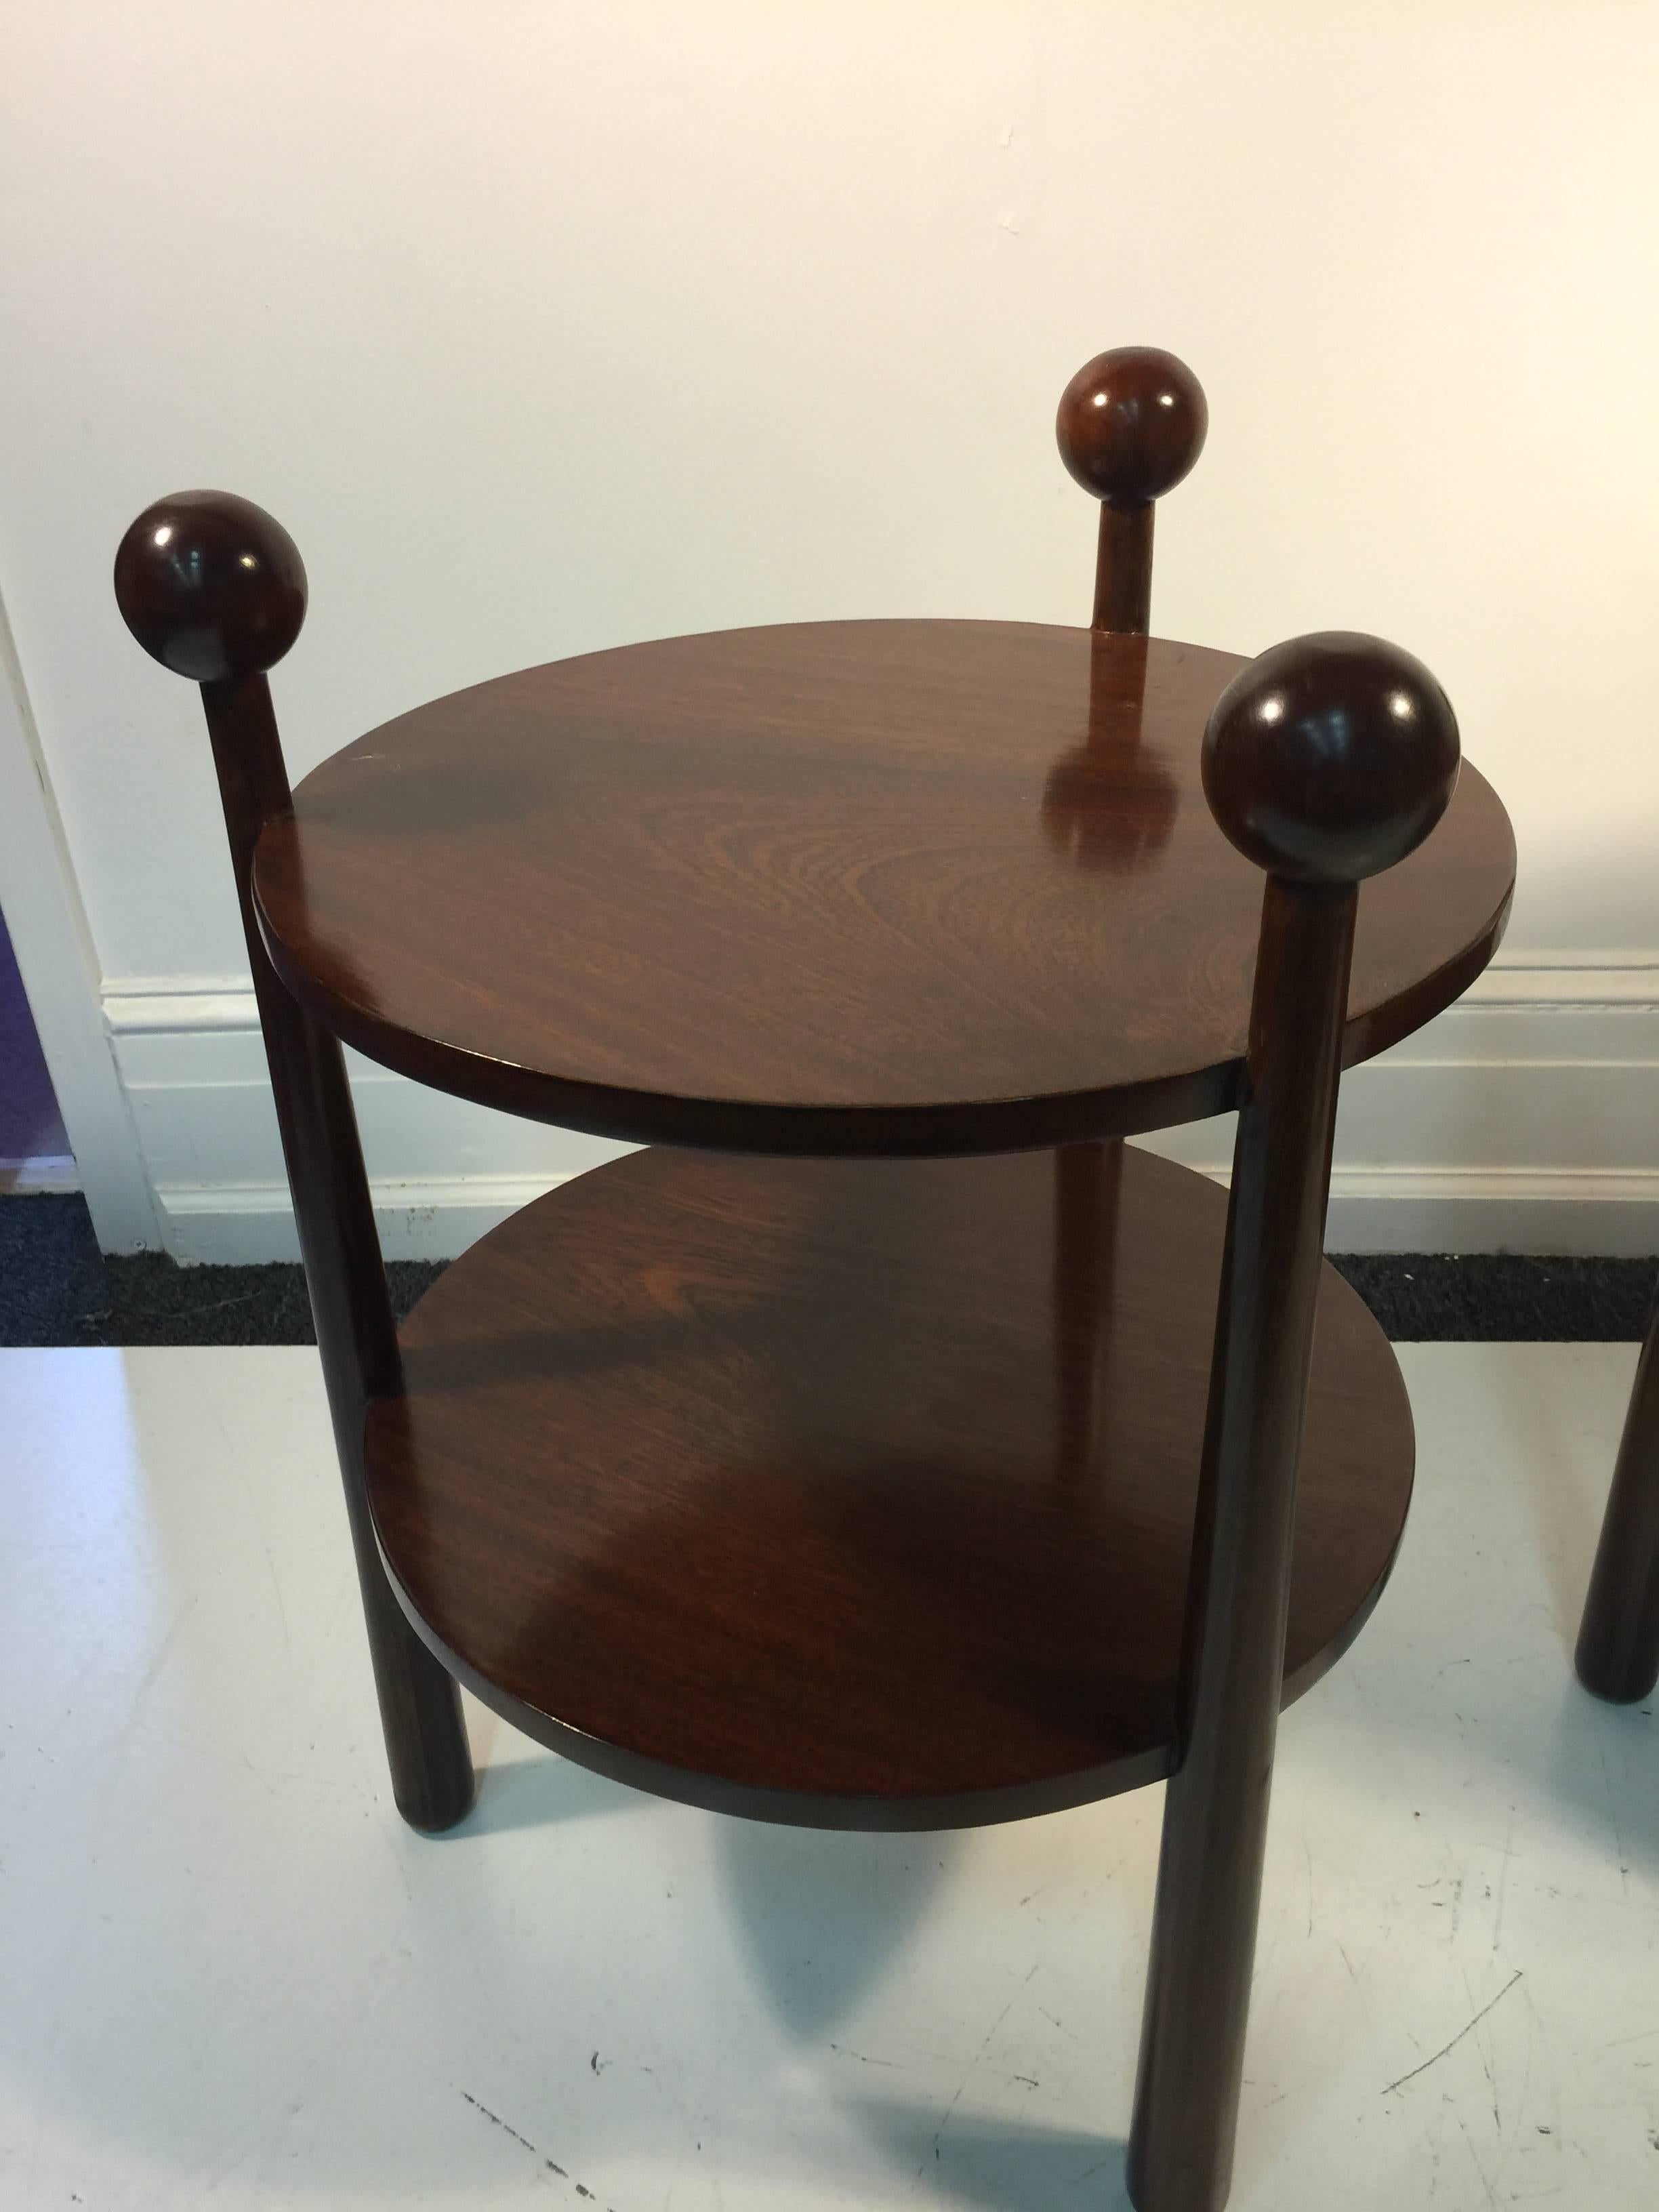 Fantastic Pair of French Two-Tier Wooden Tripod Side Tables with Ball Accents In Good Condition For Sale In Mount Penn, PA